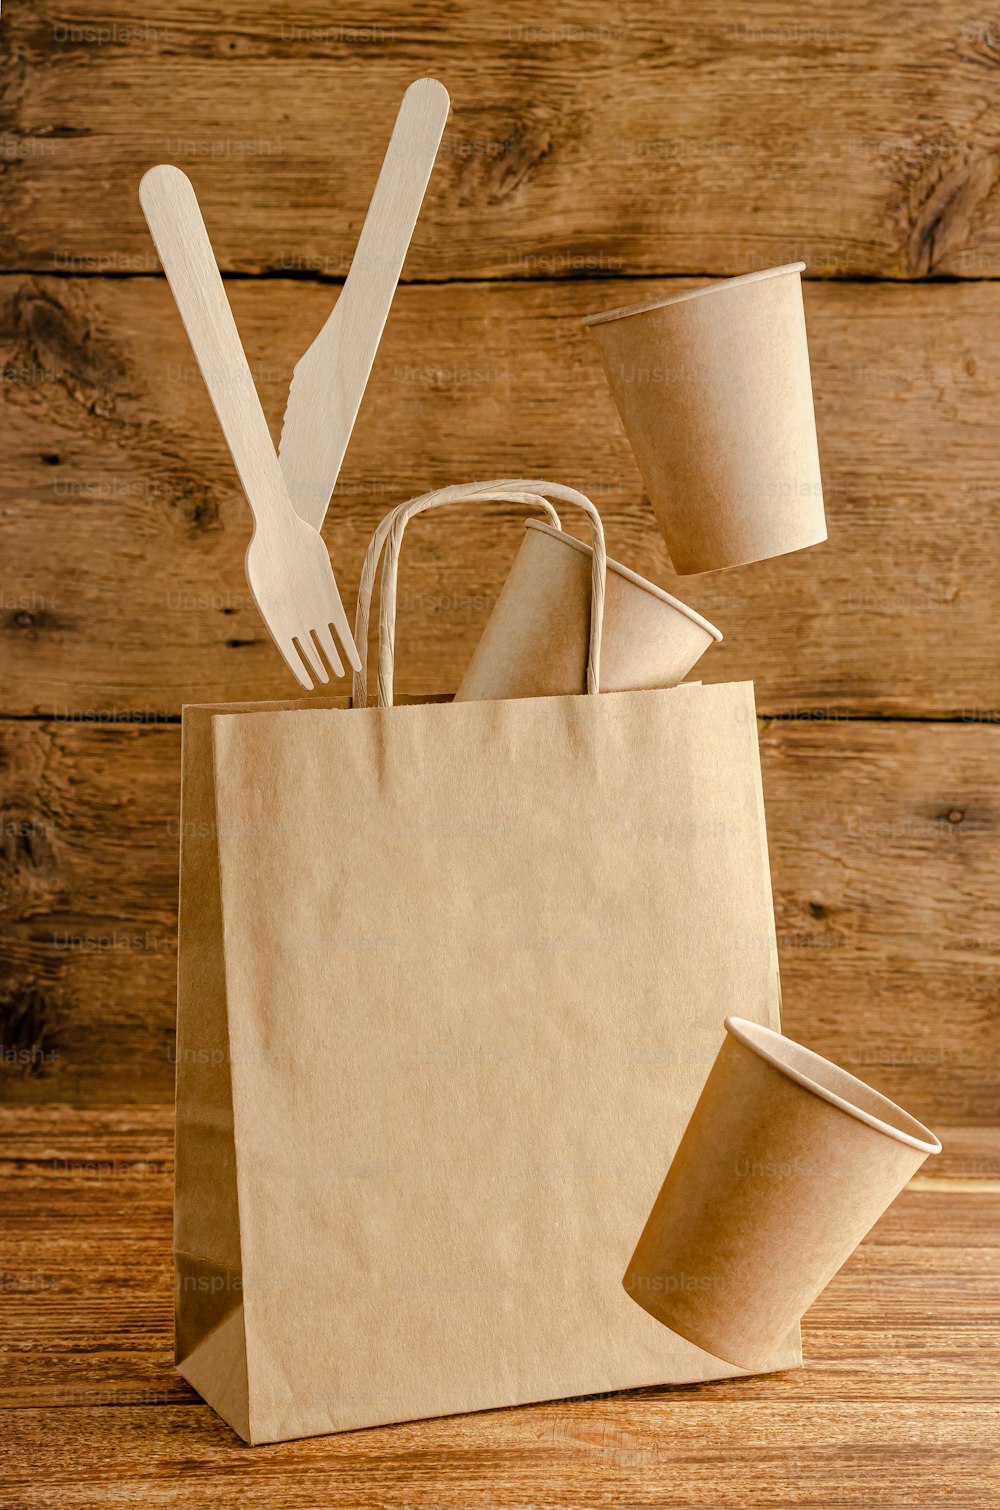 Flying disposable paper tableware over bag with mock up on wooden background. Environmental care concept.